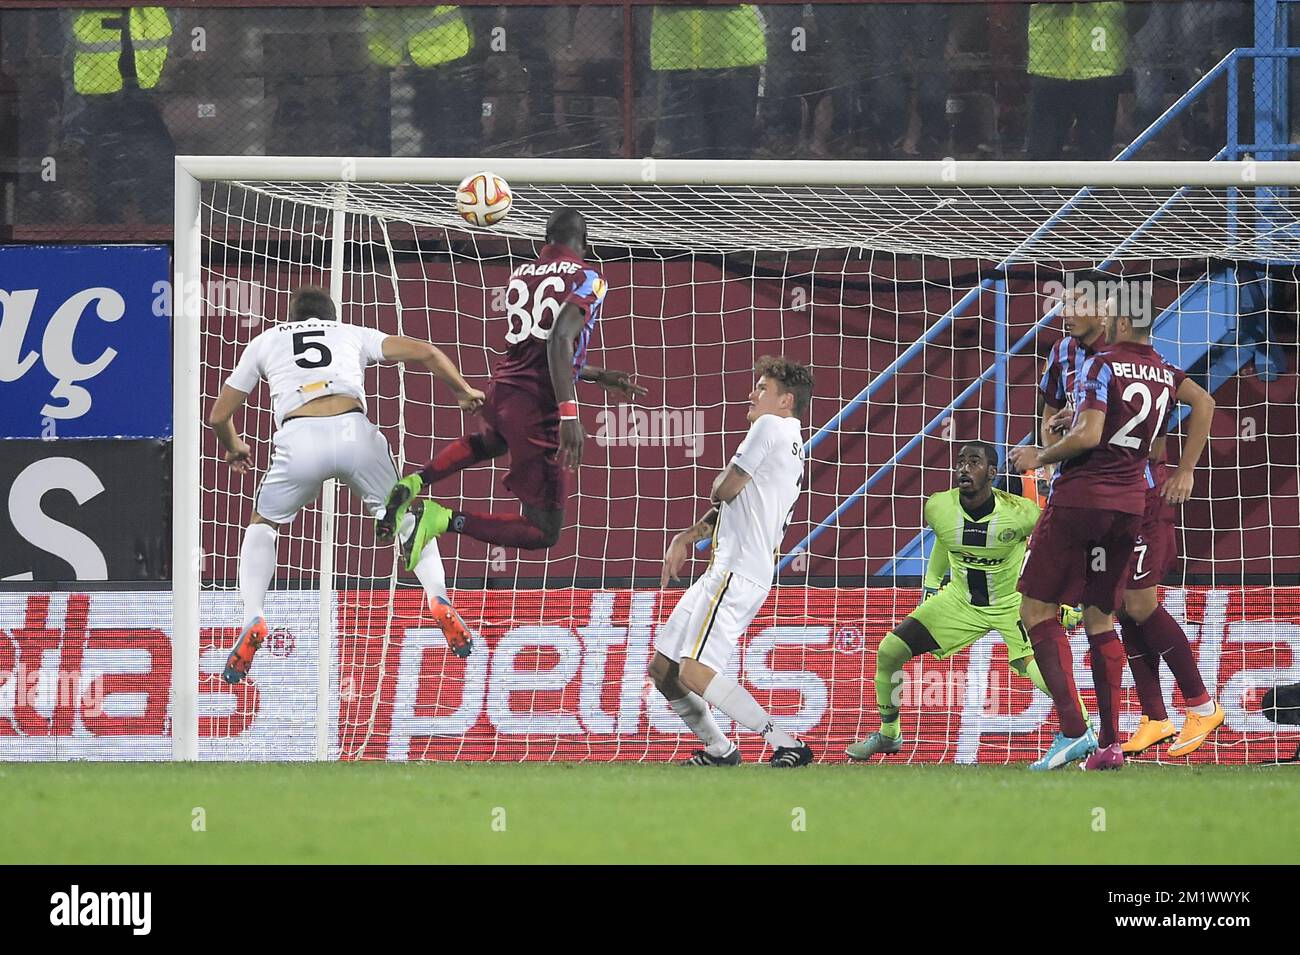 20141023 - TRABZON, TURKEY: Trabzonspor's Mustapha Yatabare (C L) scores the 1-0 goal during a game between Turkish club Trabzonspor AS and Belgian soccer team KSC Lokeren OVL in the Huseyin Avni Aker Stadium in Trabzon, Thursday 23 October 2014. It is the third day of the group stage of the UEFA Europa League competition, in group L. BELGA PHOTO YORICK JANSENS Stock Photo